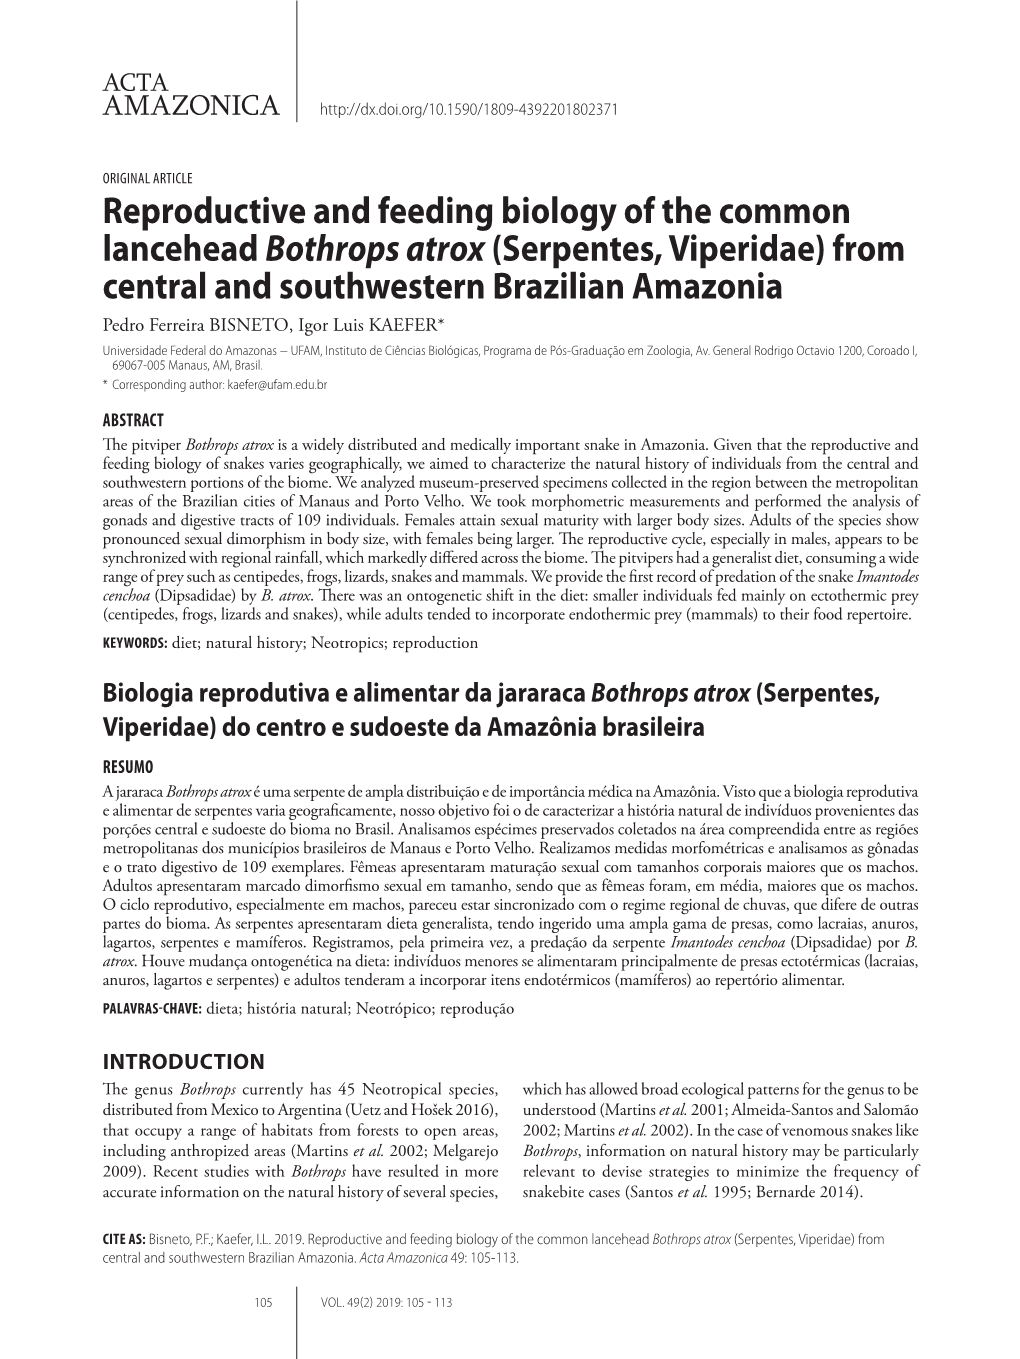 Reproductive and Feeding Biology of the Common Lancehead Bothrops